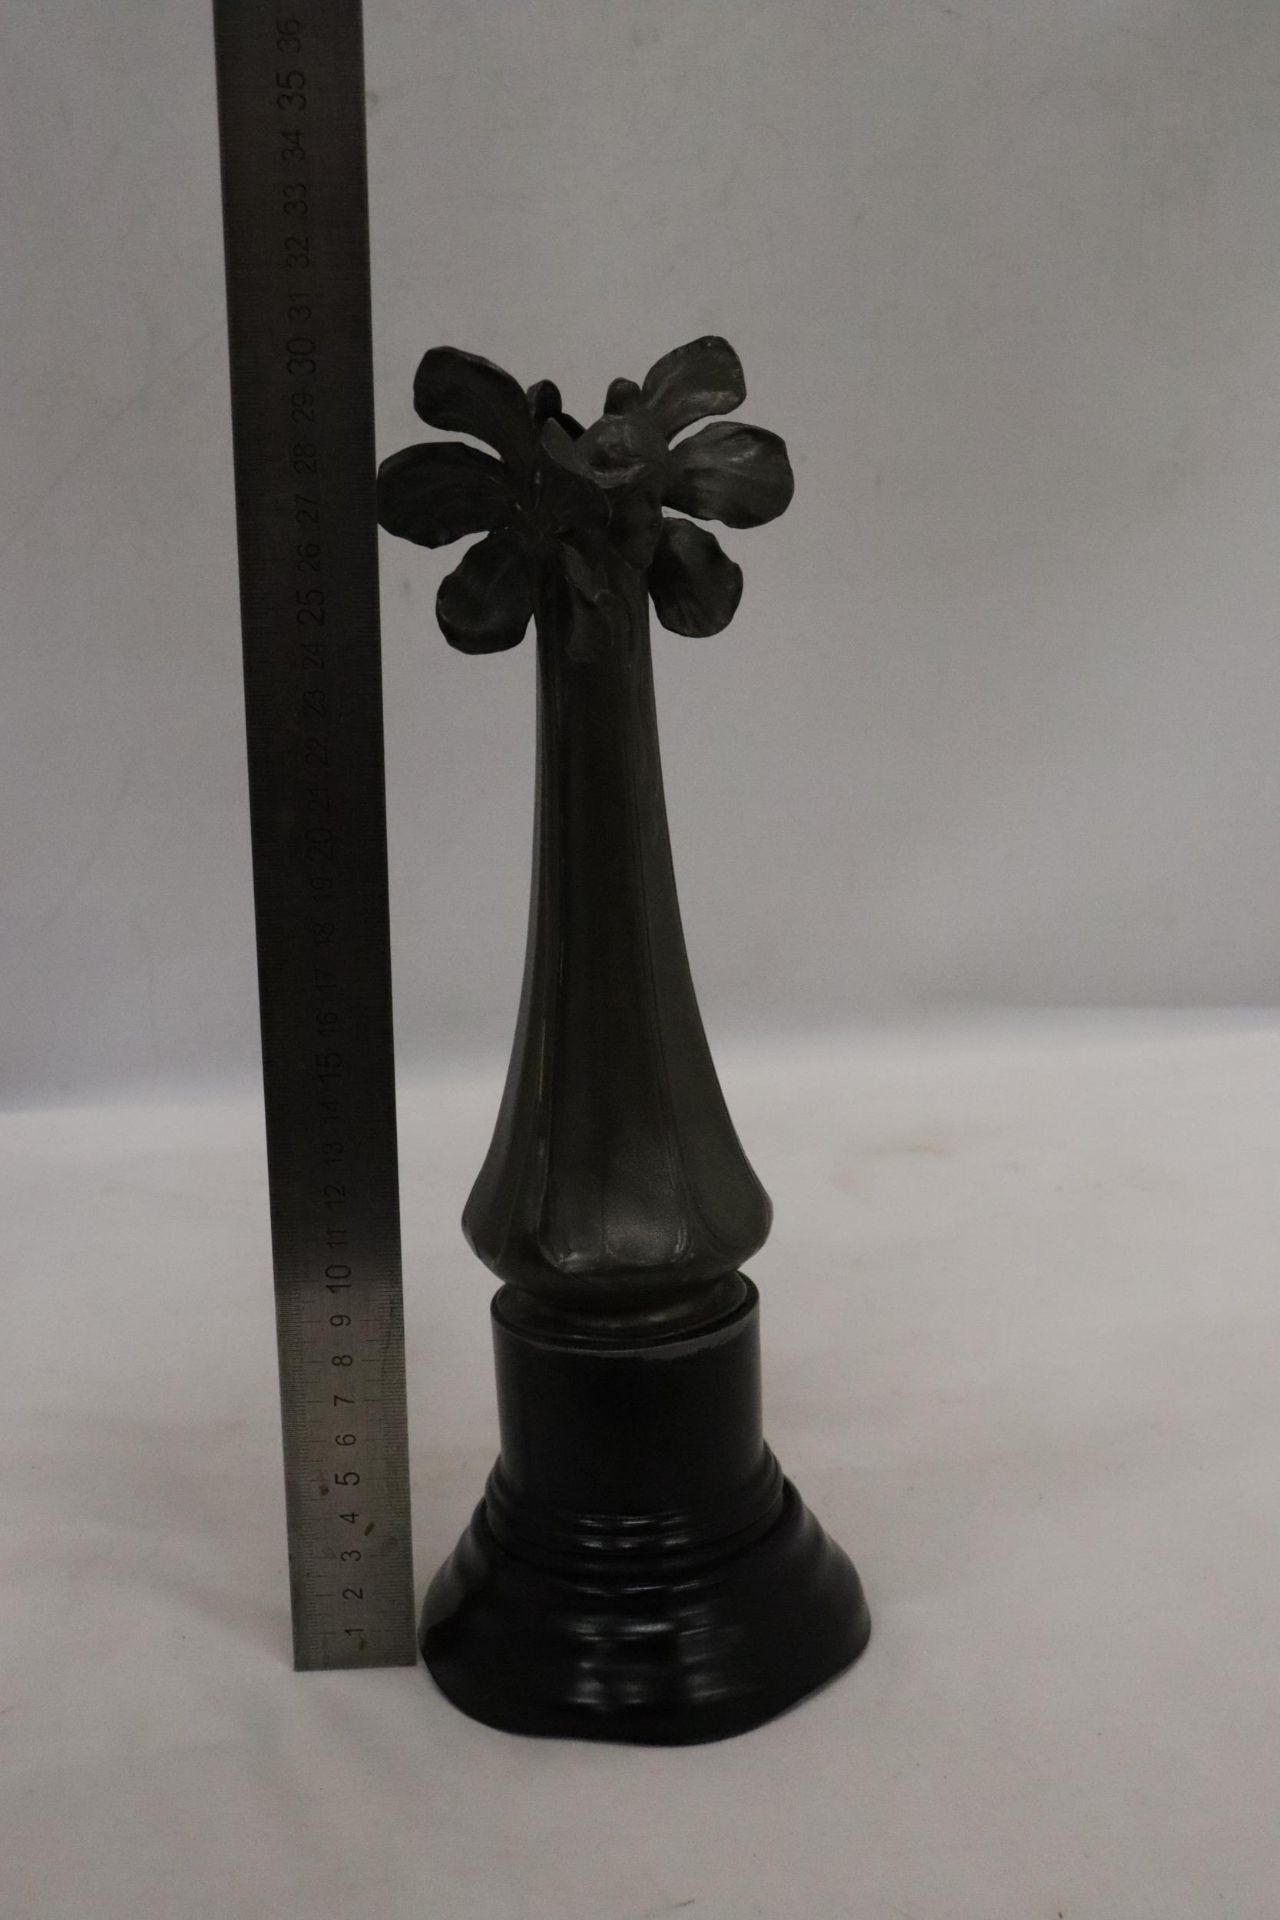 AN IMPERIAL ZINN B & G PEWTER VASE IN AN ART NOUVEAU STYLE - Image 7 of 8